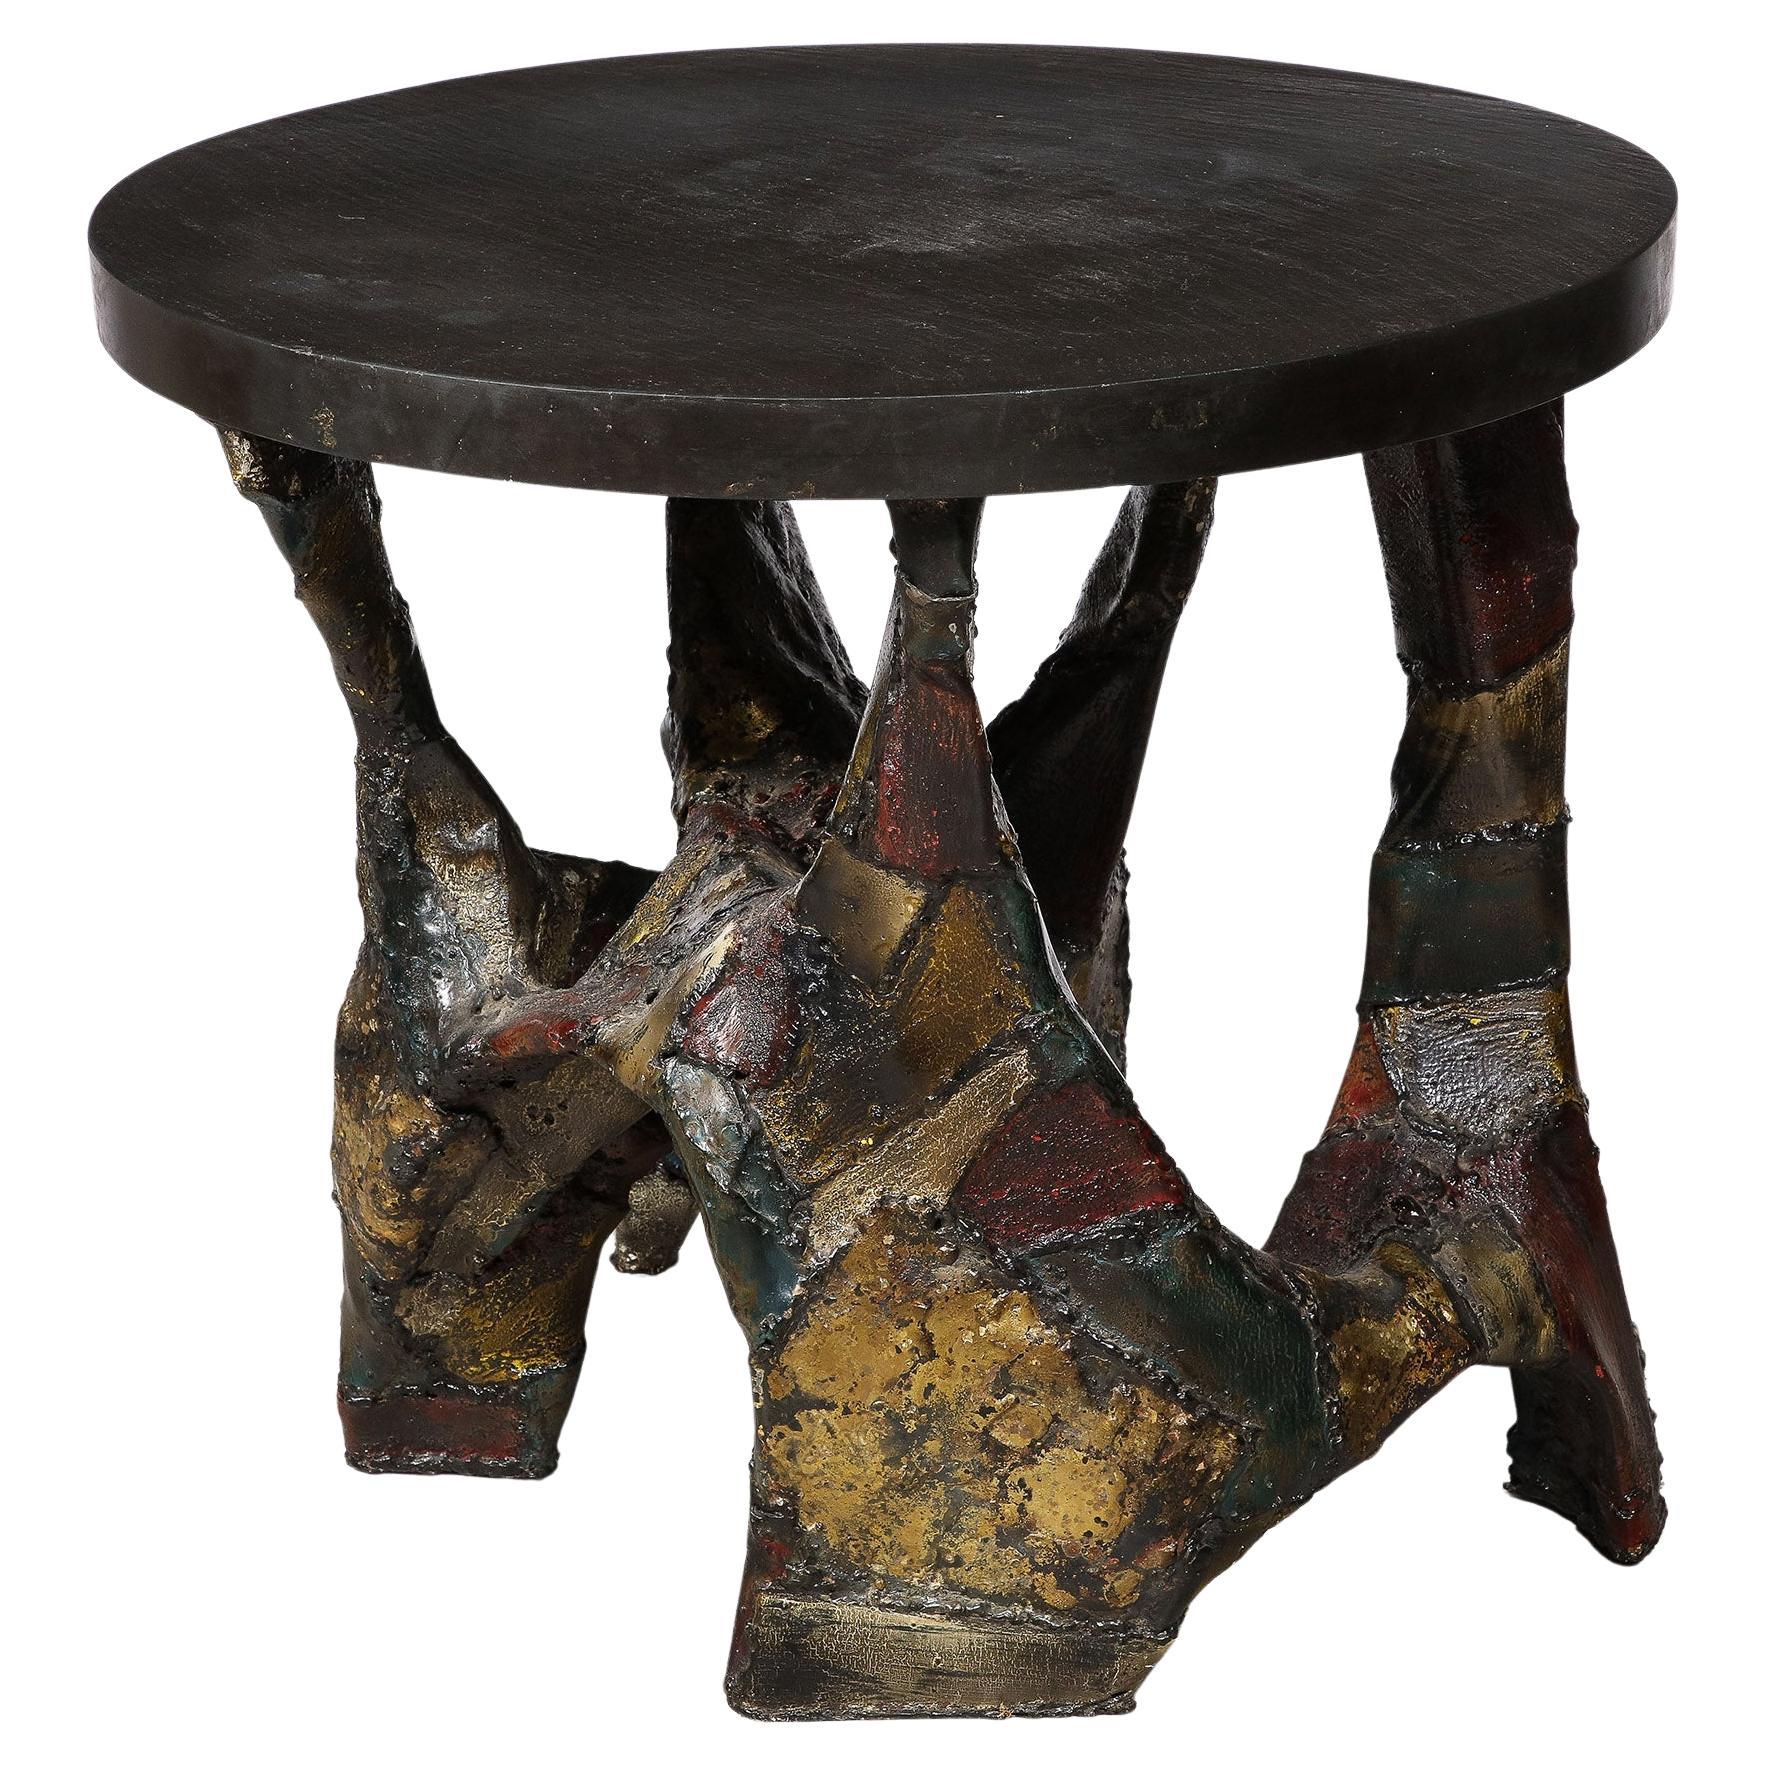 Patchwork Table by Paul Evans